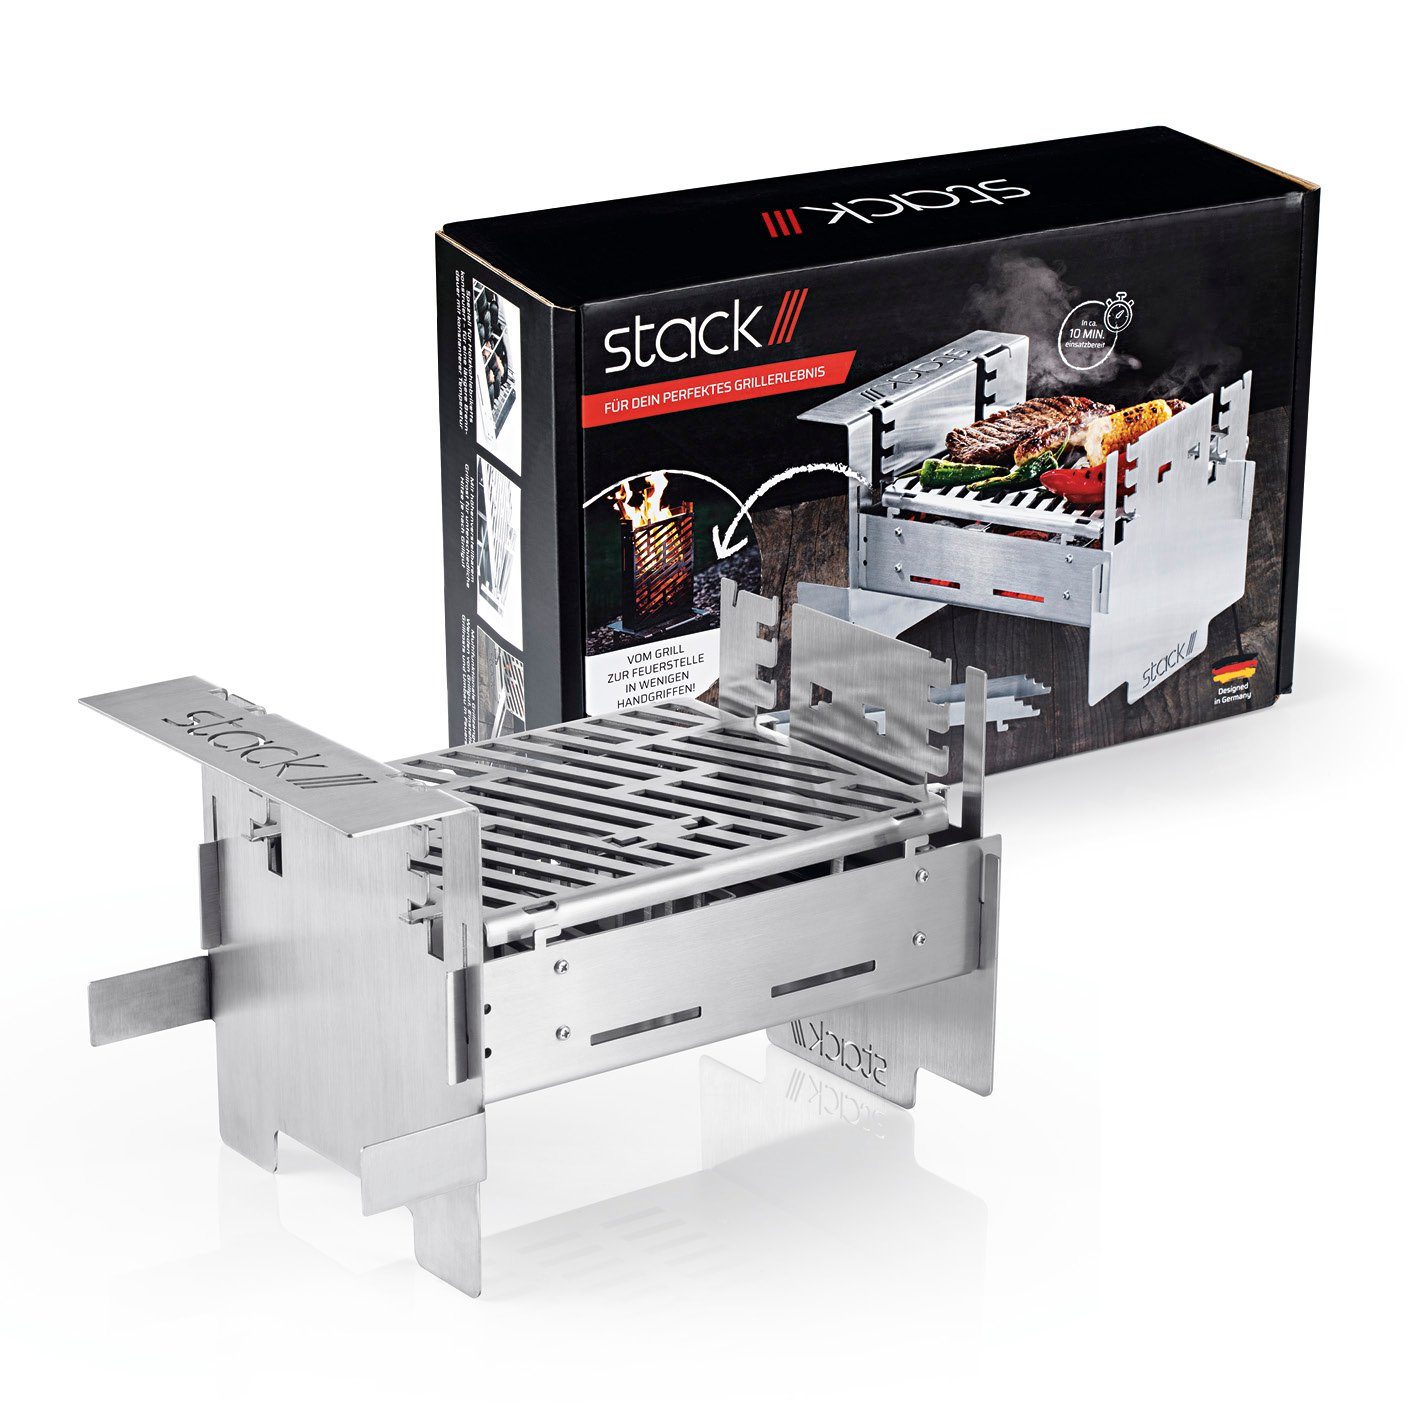 2 cm Feuerstelle stack Stack Holzkohlegrill 21 Feuerkorb 1 und grill, x 27 n' in Grillfläche stack///grill Grill Trangia